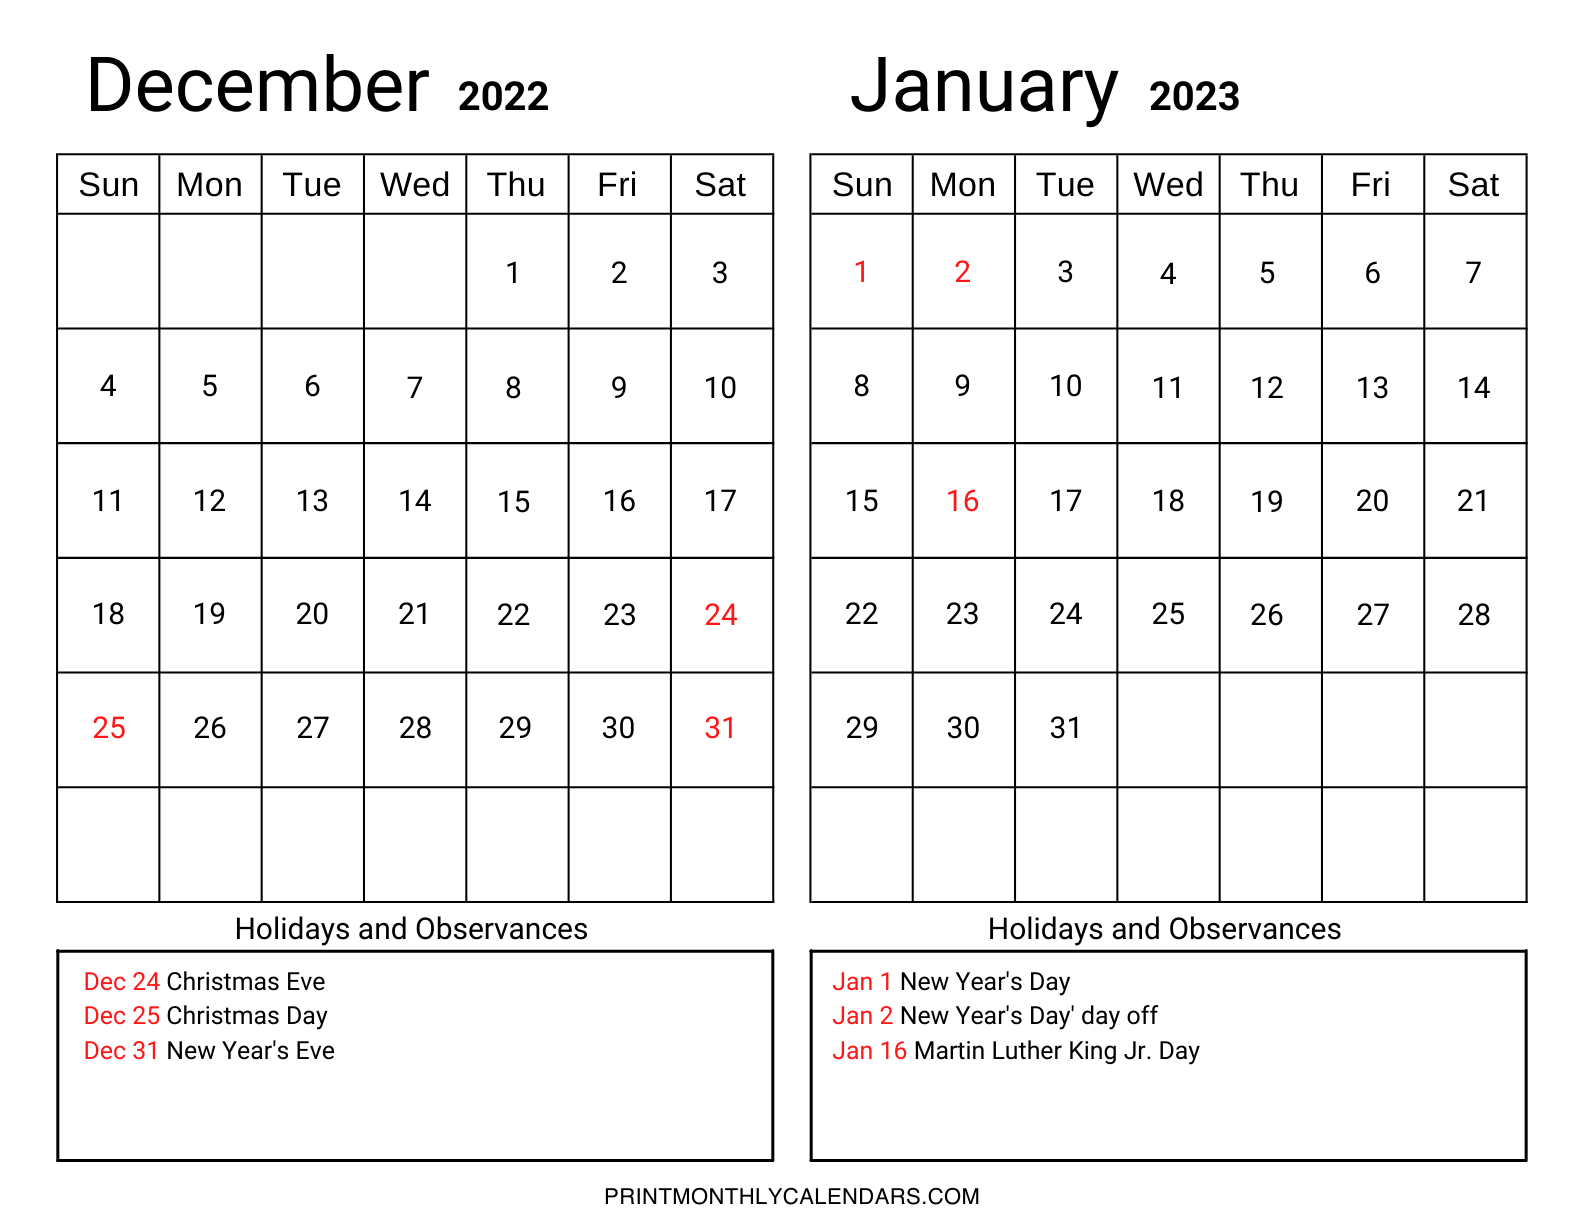 December January 2023 Holidays calendar template has two month calendar grids in landscape orientation. At the bottom of the grids, United states holidays and observances are written.